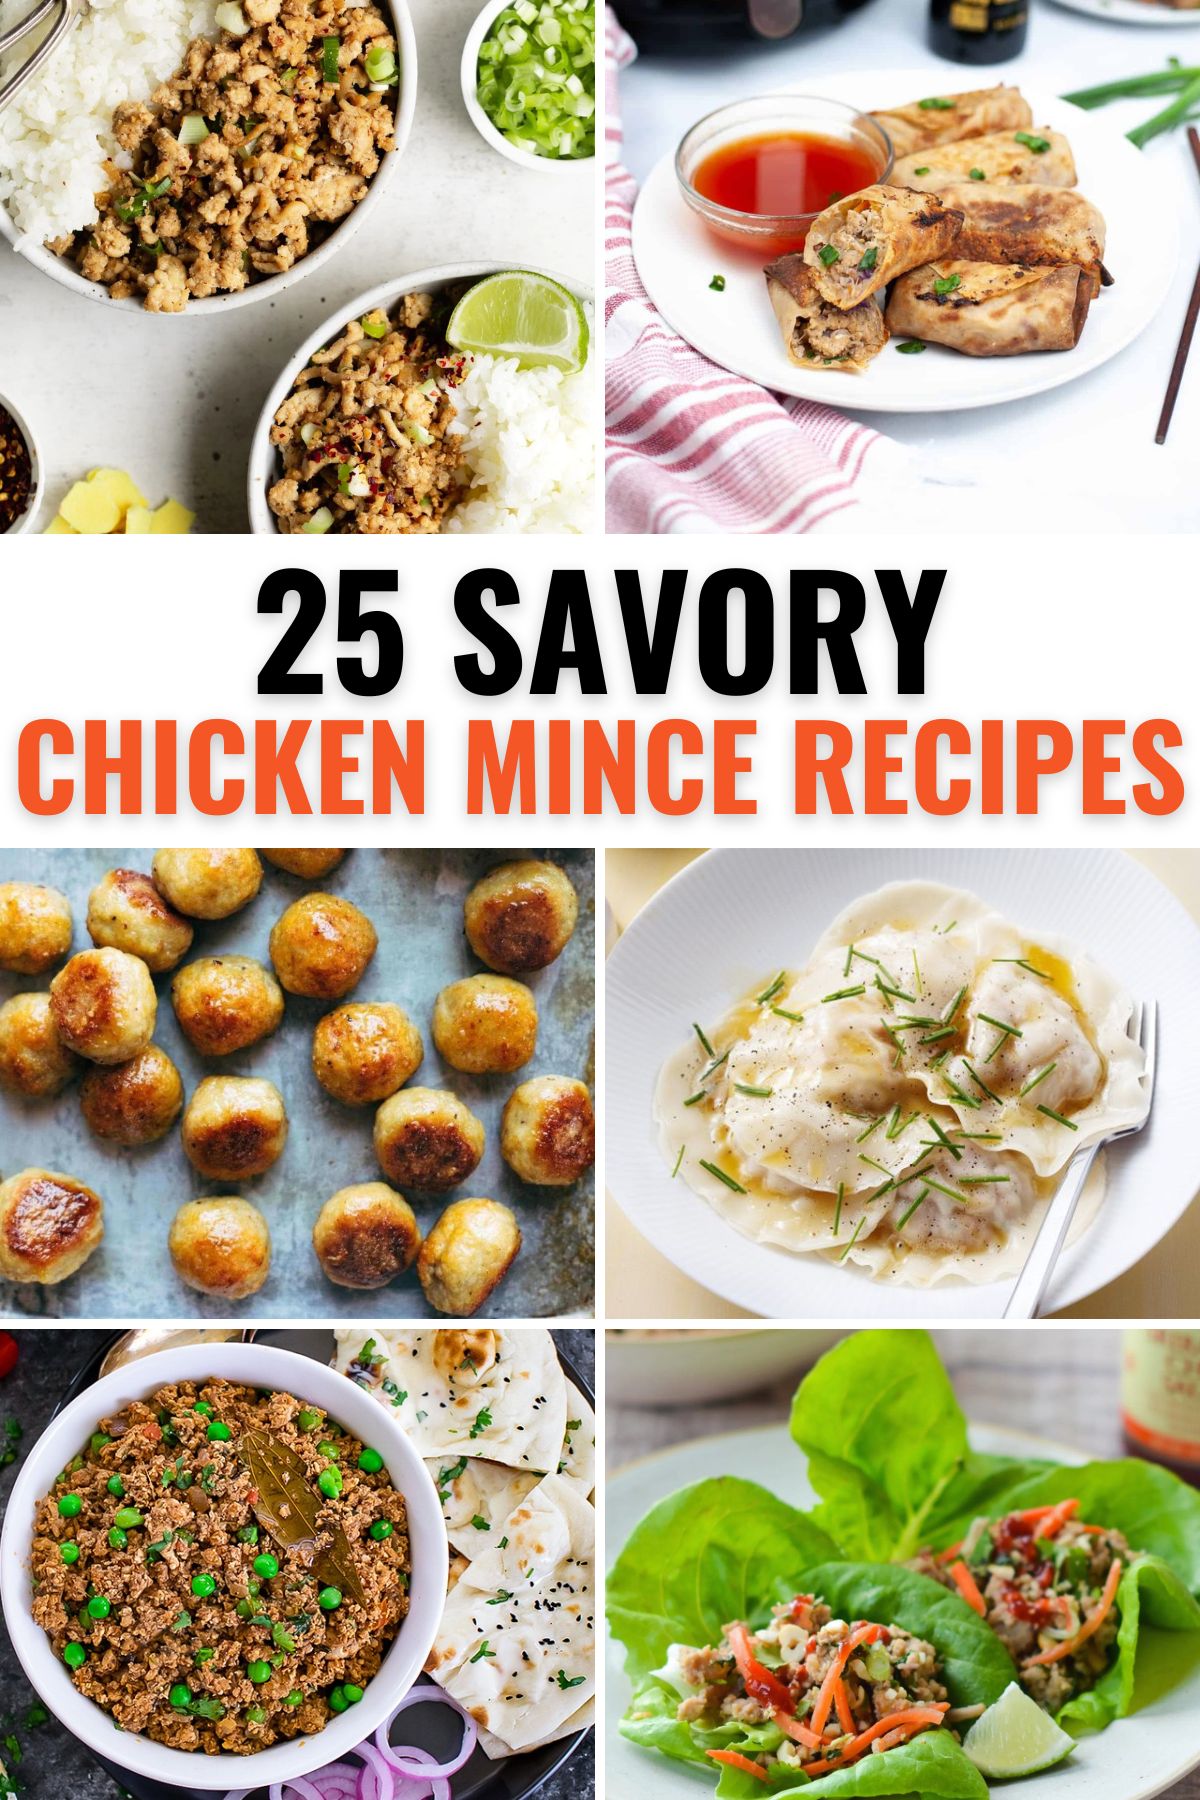 Collection of mince chicken recipes including stir fry, meatballs, spring rolls, ravioli, keema, and lettuce cups.